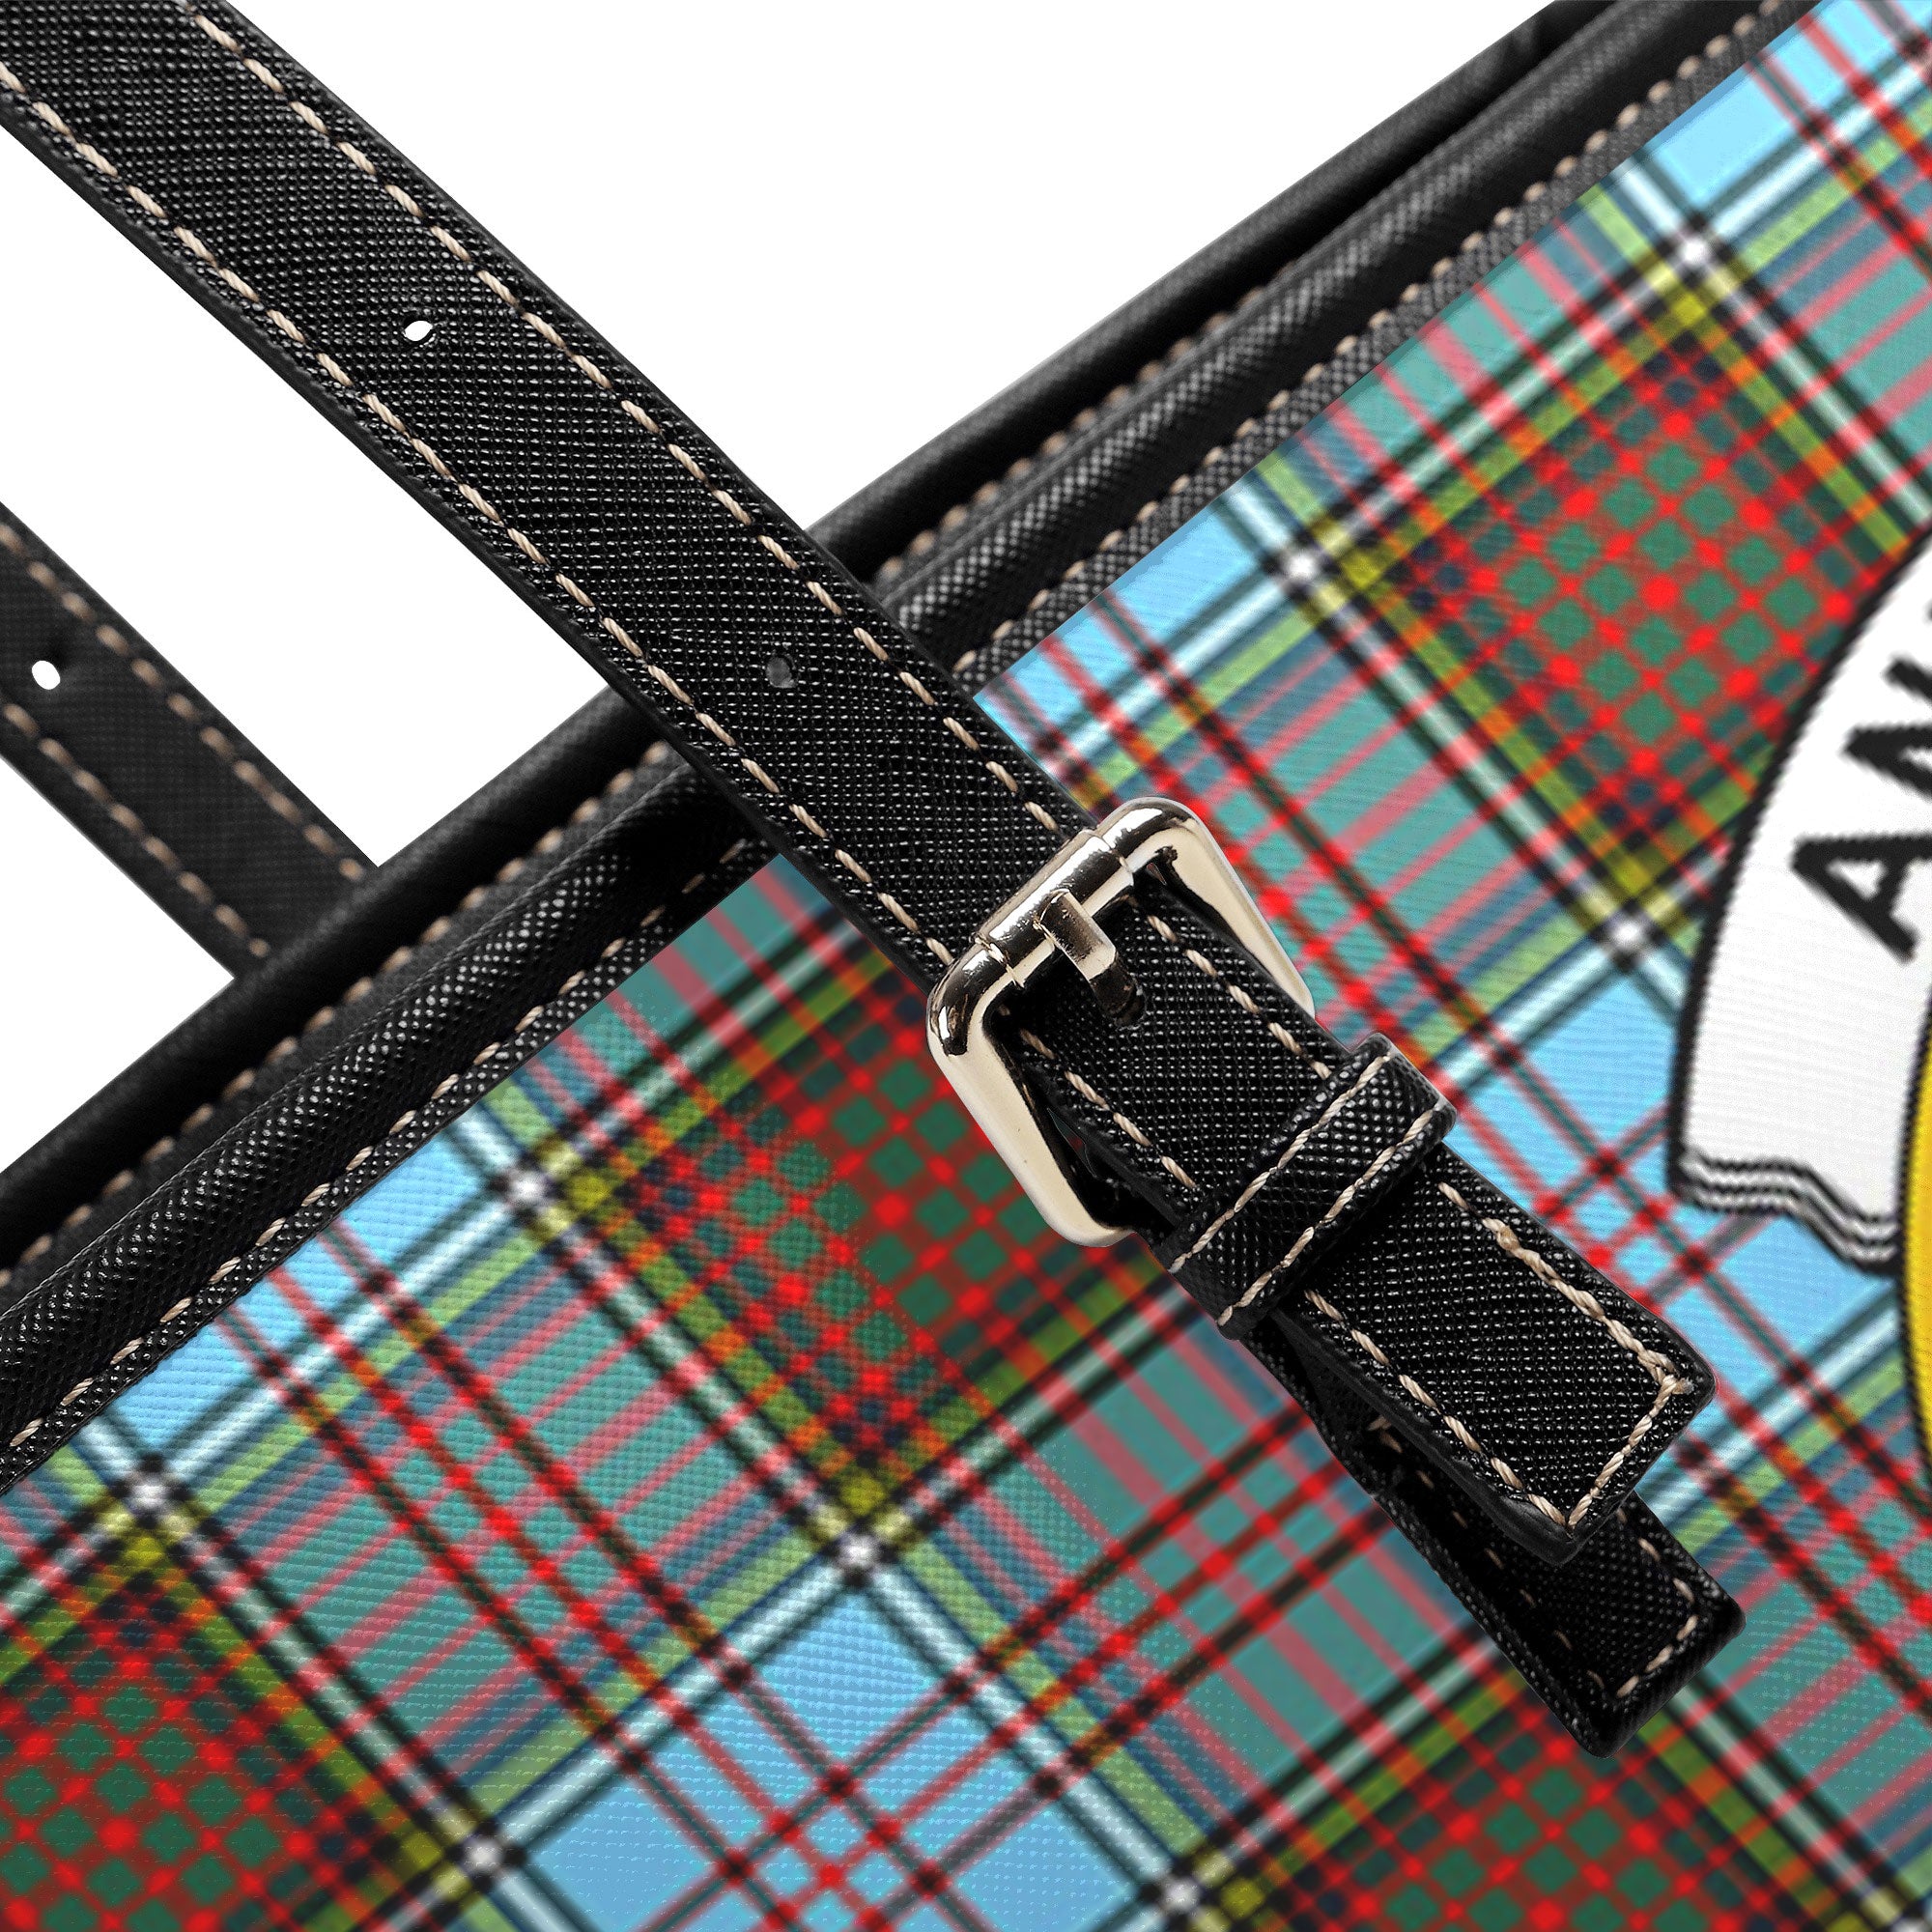 Anderson Ancient Tartan Crest Leather Tote Bag